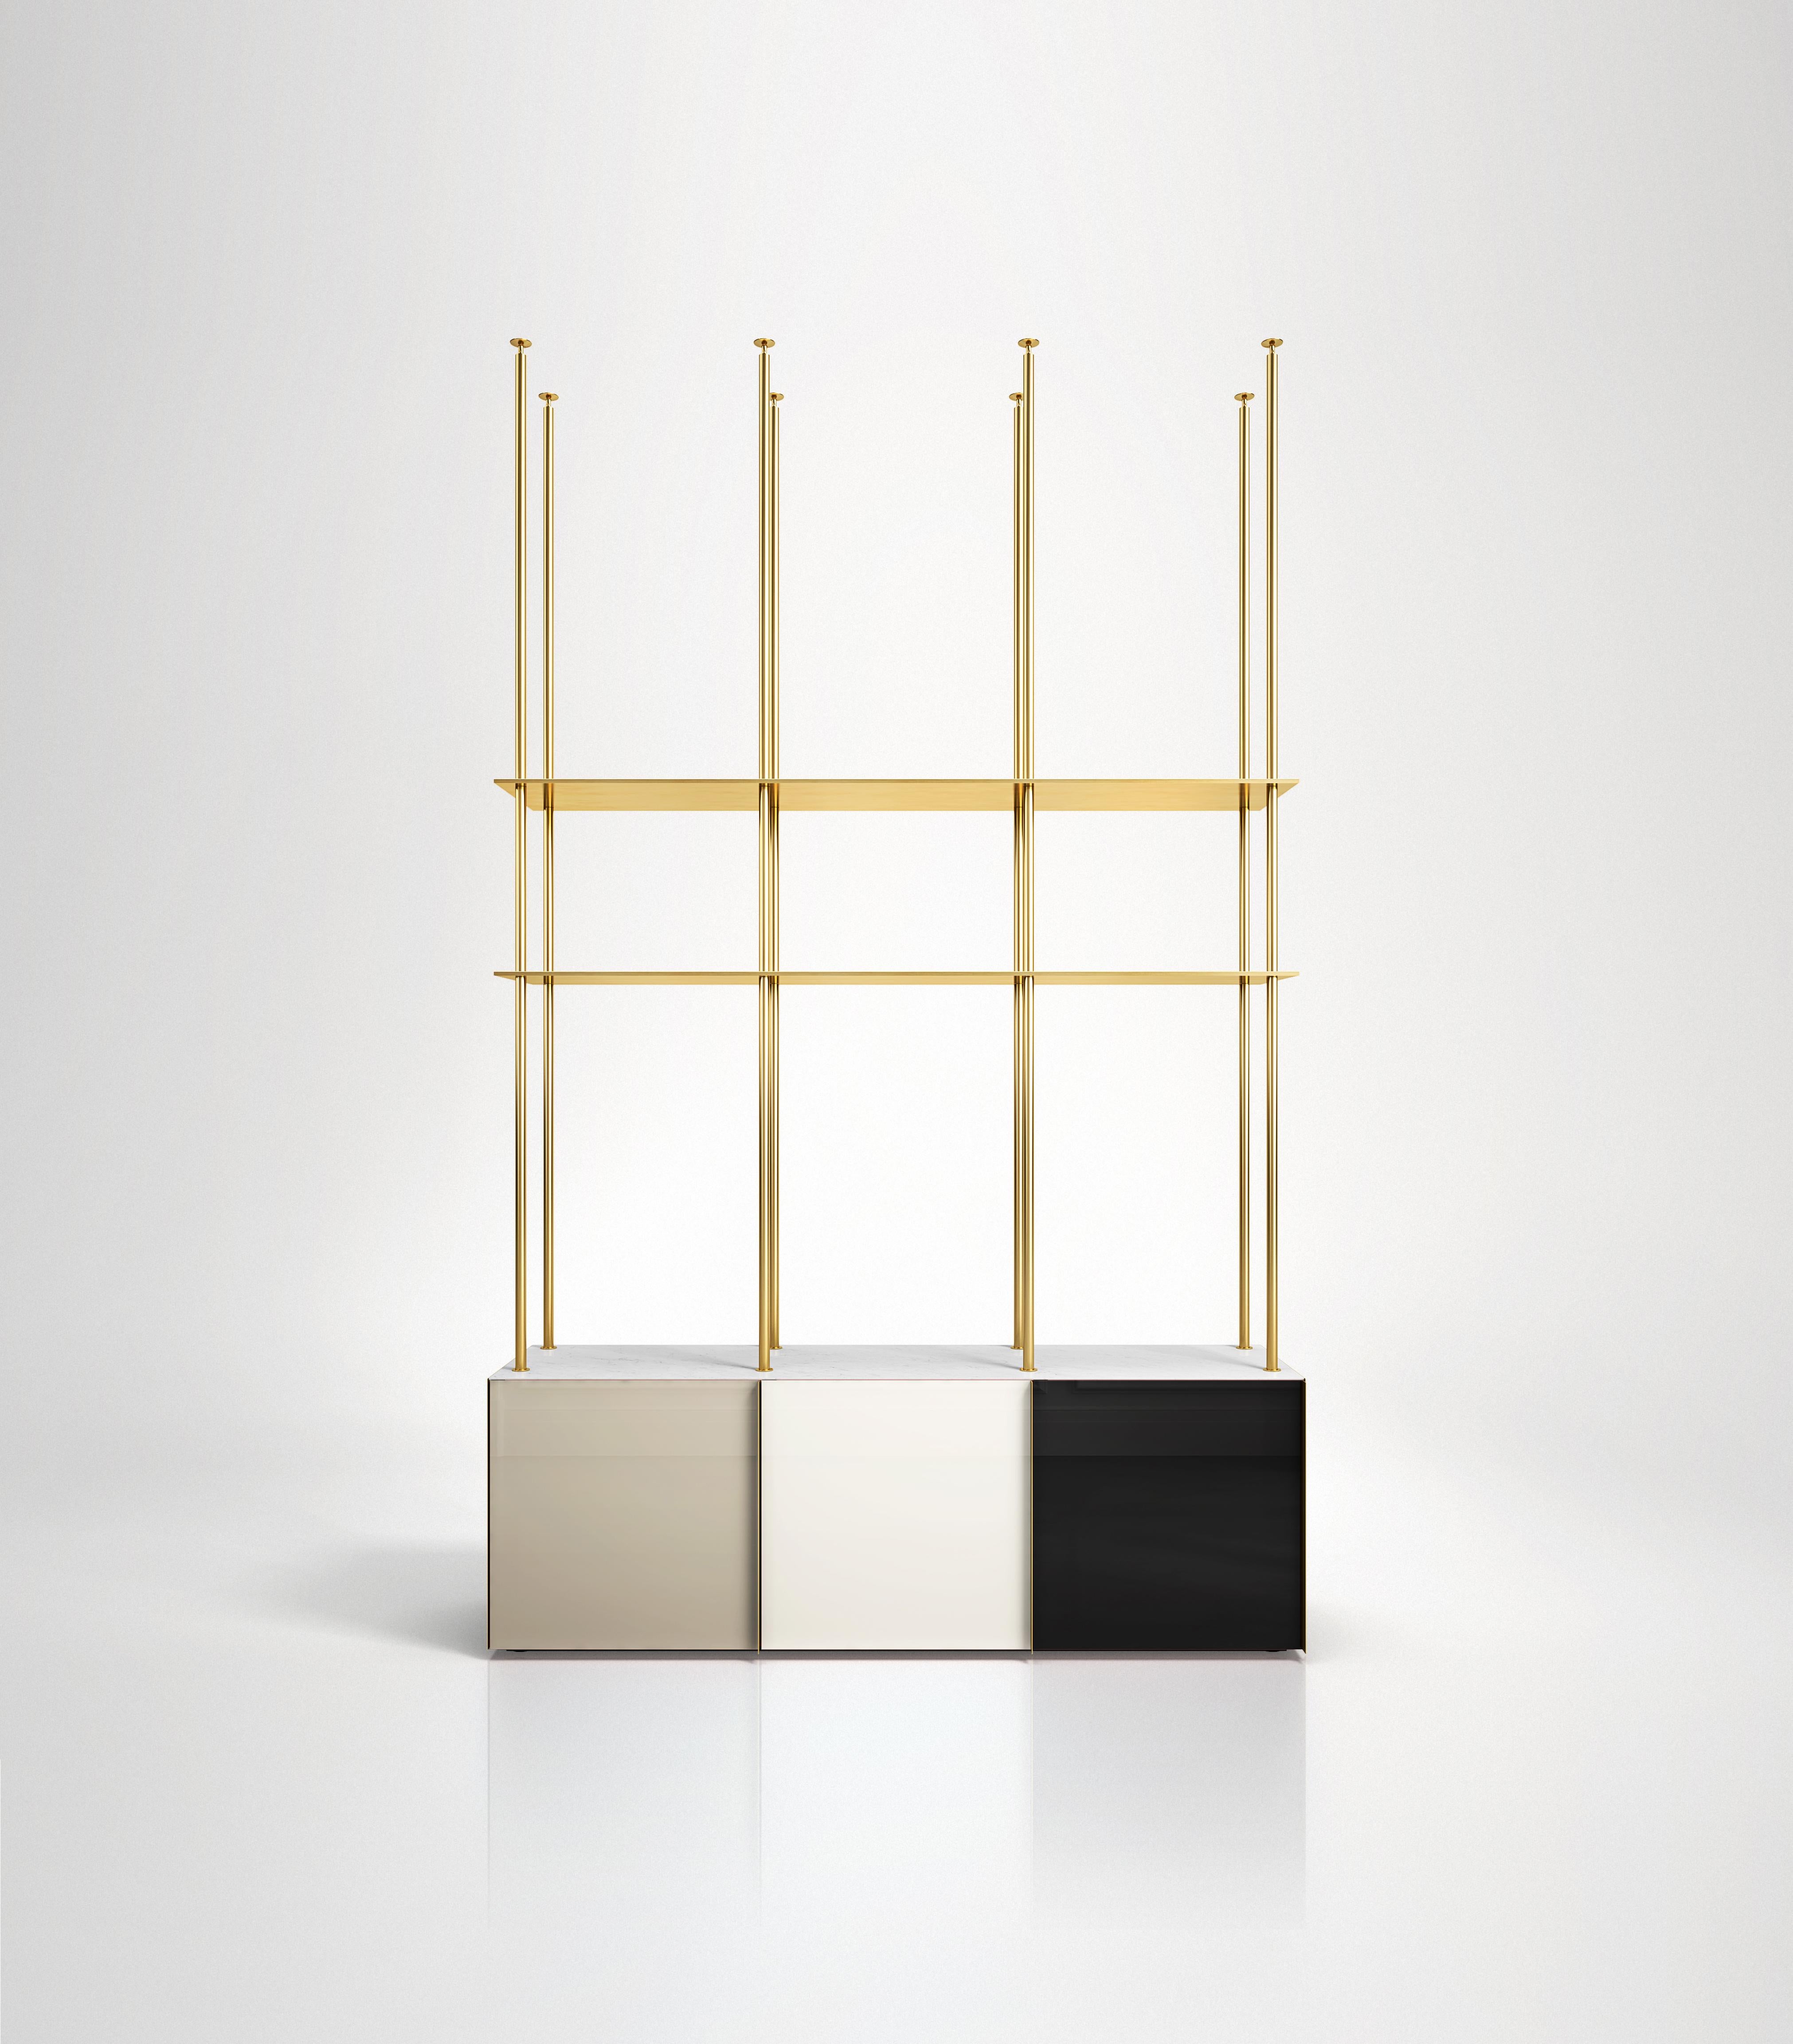 Bookcase 01
Floor to ceiling bookcase featuring 3 back-painted glass doors colored in neutral tones, marble or onyx top, lacquered wooden interior and brass shelving. Each of the three doors has a vertical brass handle and each compartment has an